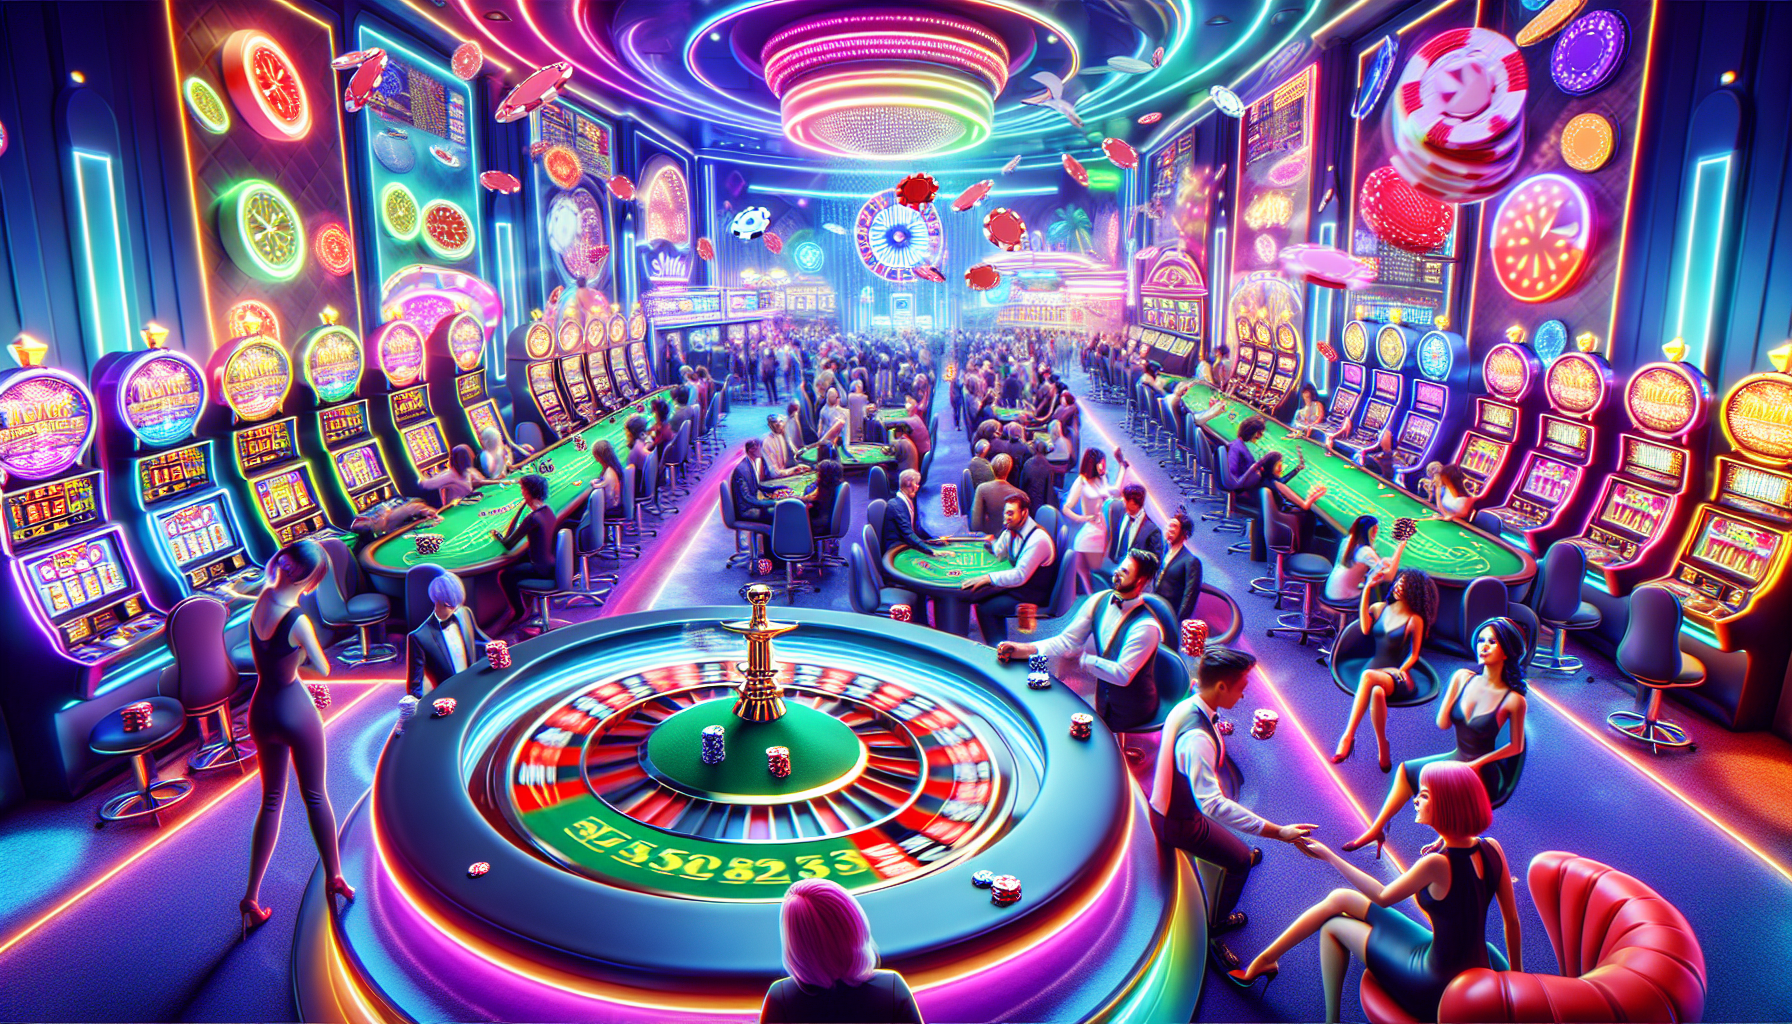 Illustration of a virtual casino with slot machines, roulette wheel, and poker table